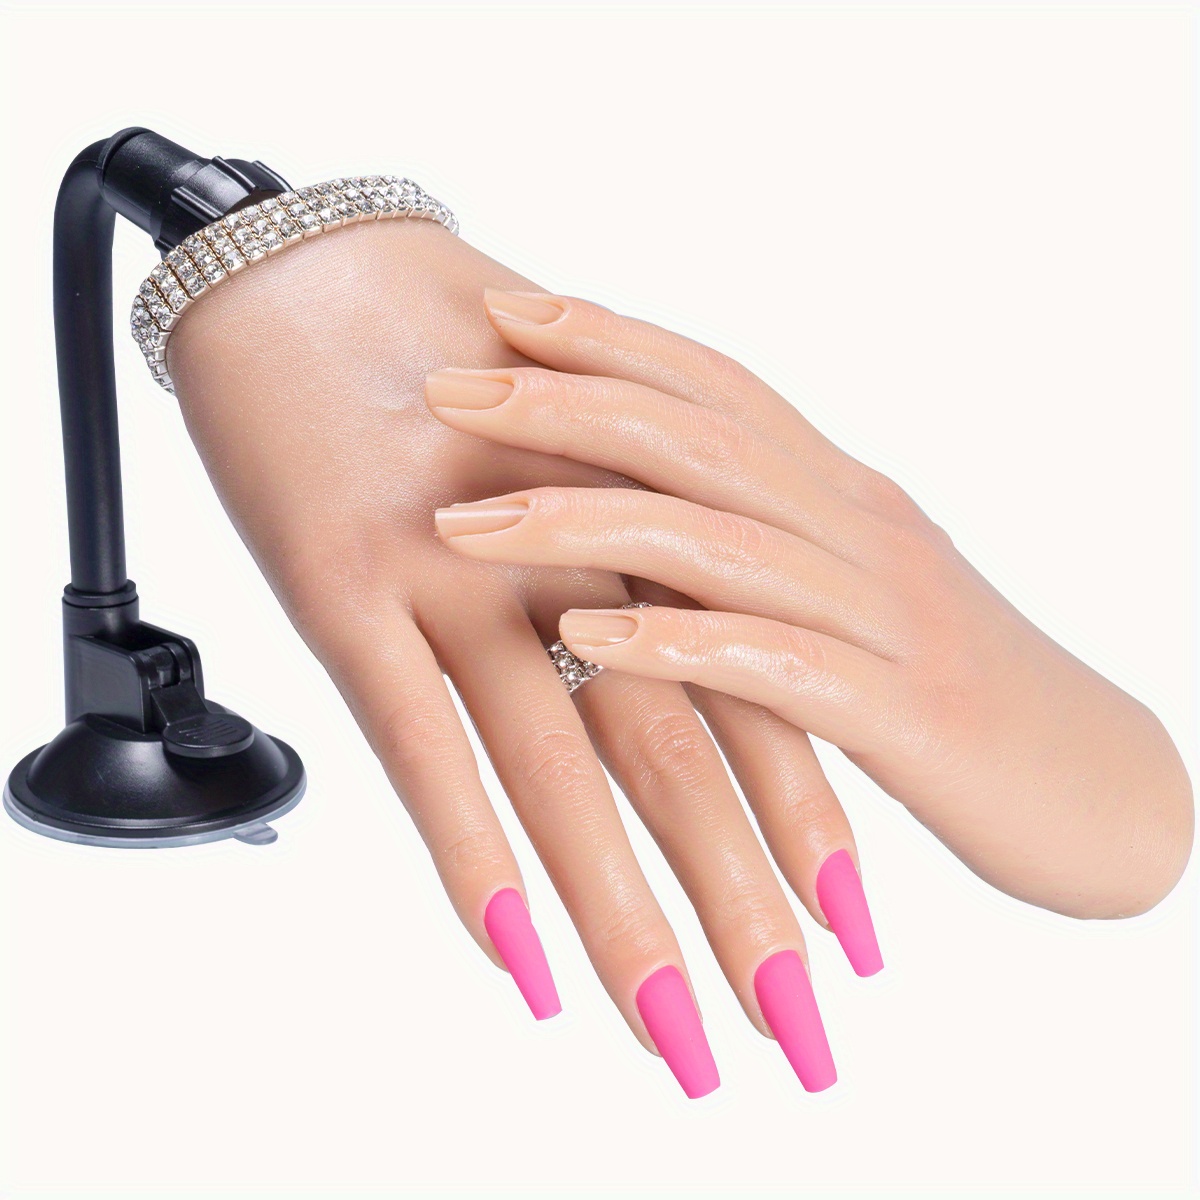 XMASIR Practice Hand for Acrylic Nails, Silicone Nail Hand Practice  Flexible Nail Training Fake Hand with Stand Bracket Make-up Mannequin Hands  for Manicure Beg…